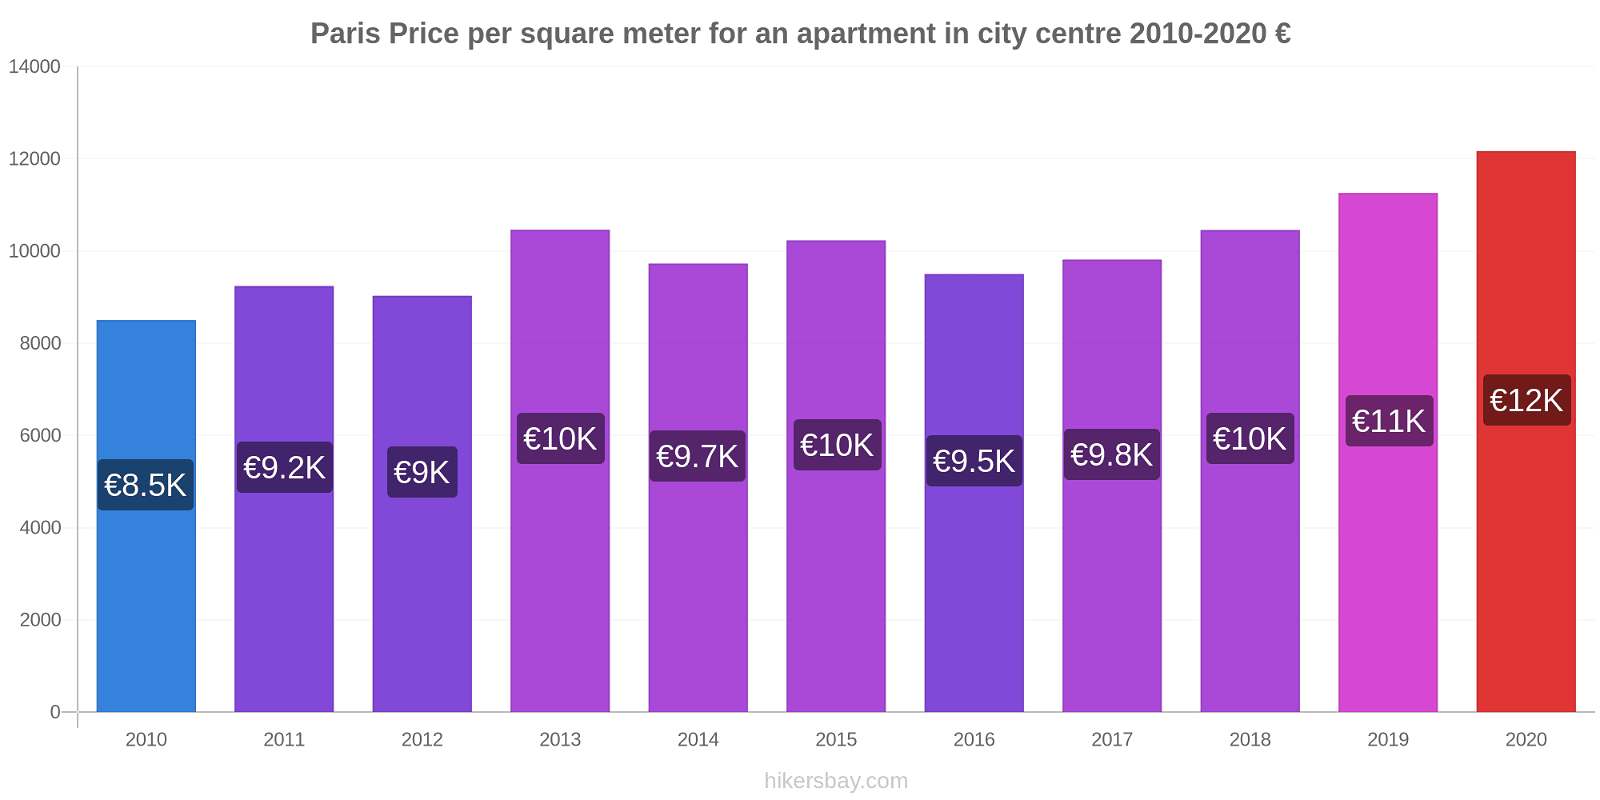 Paris price changes Price per square meter for an apartment in city centre hikersbay.com